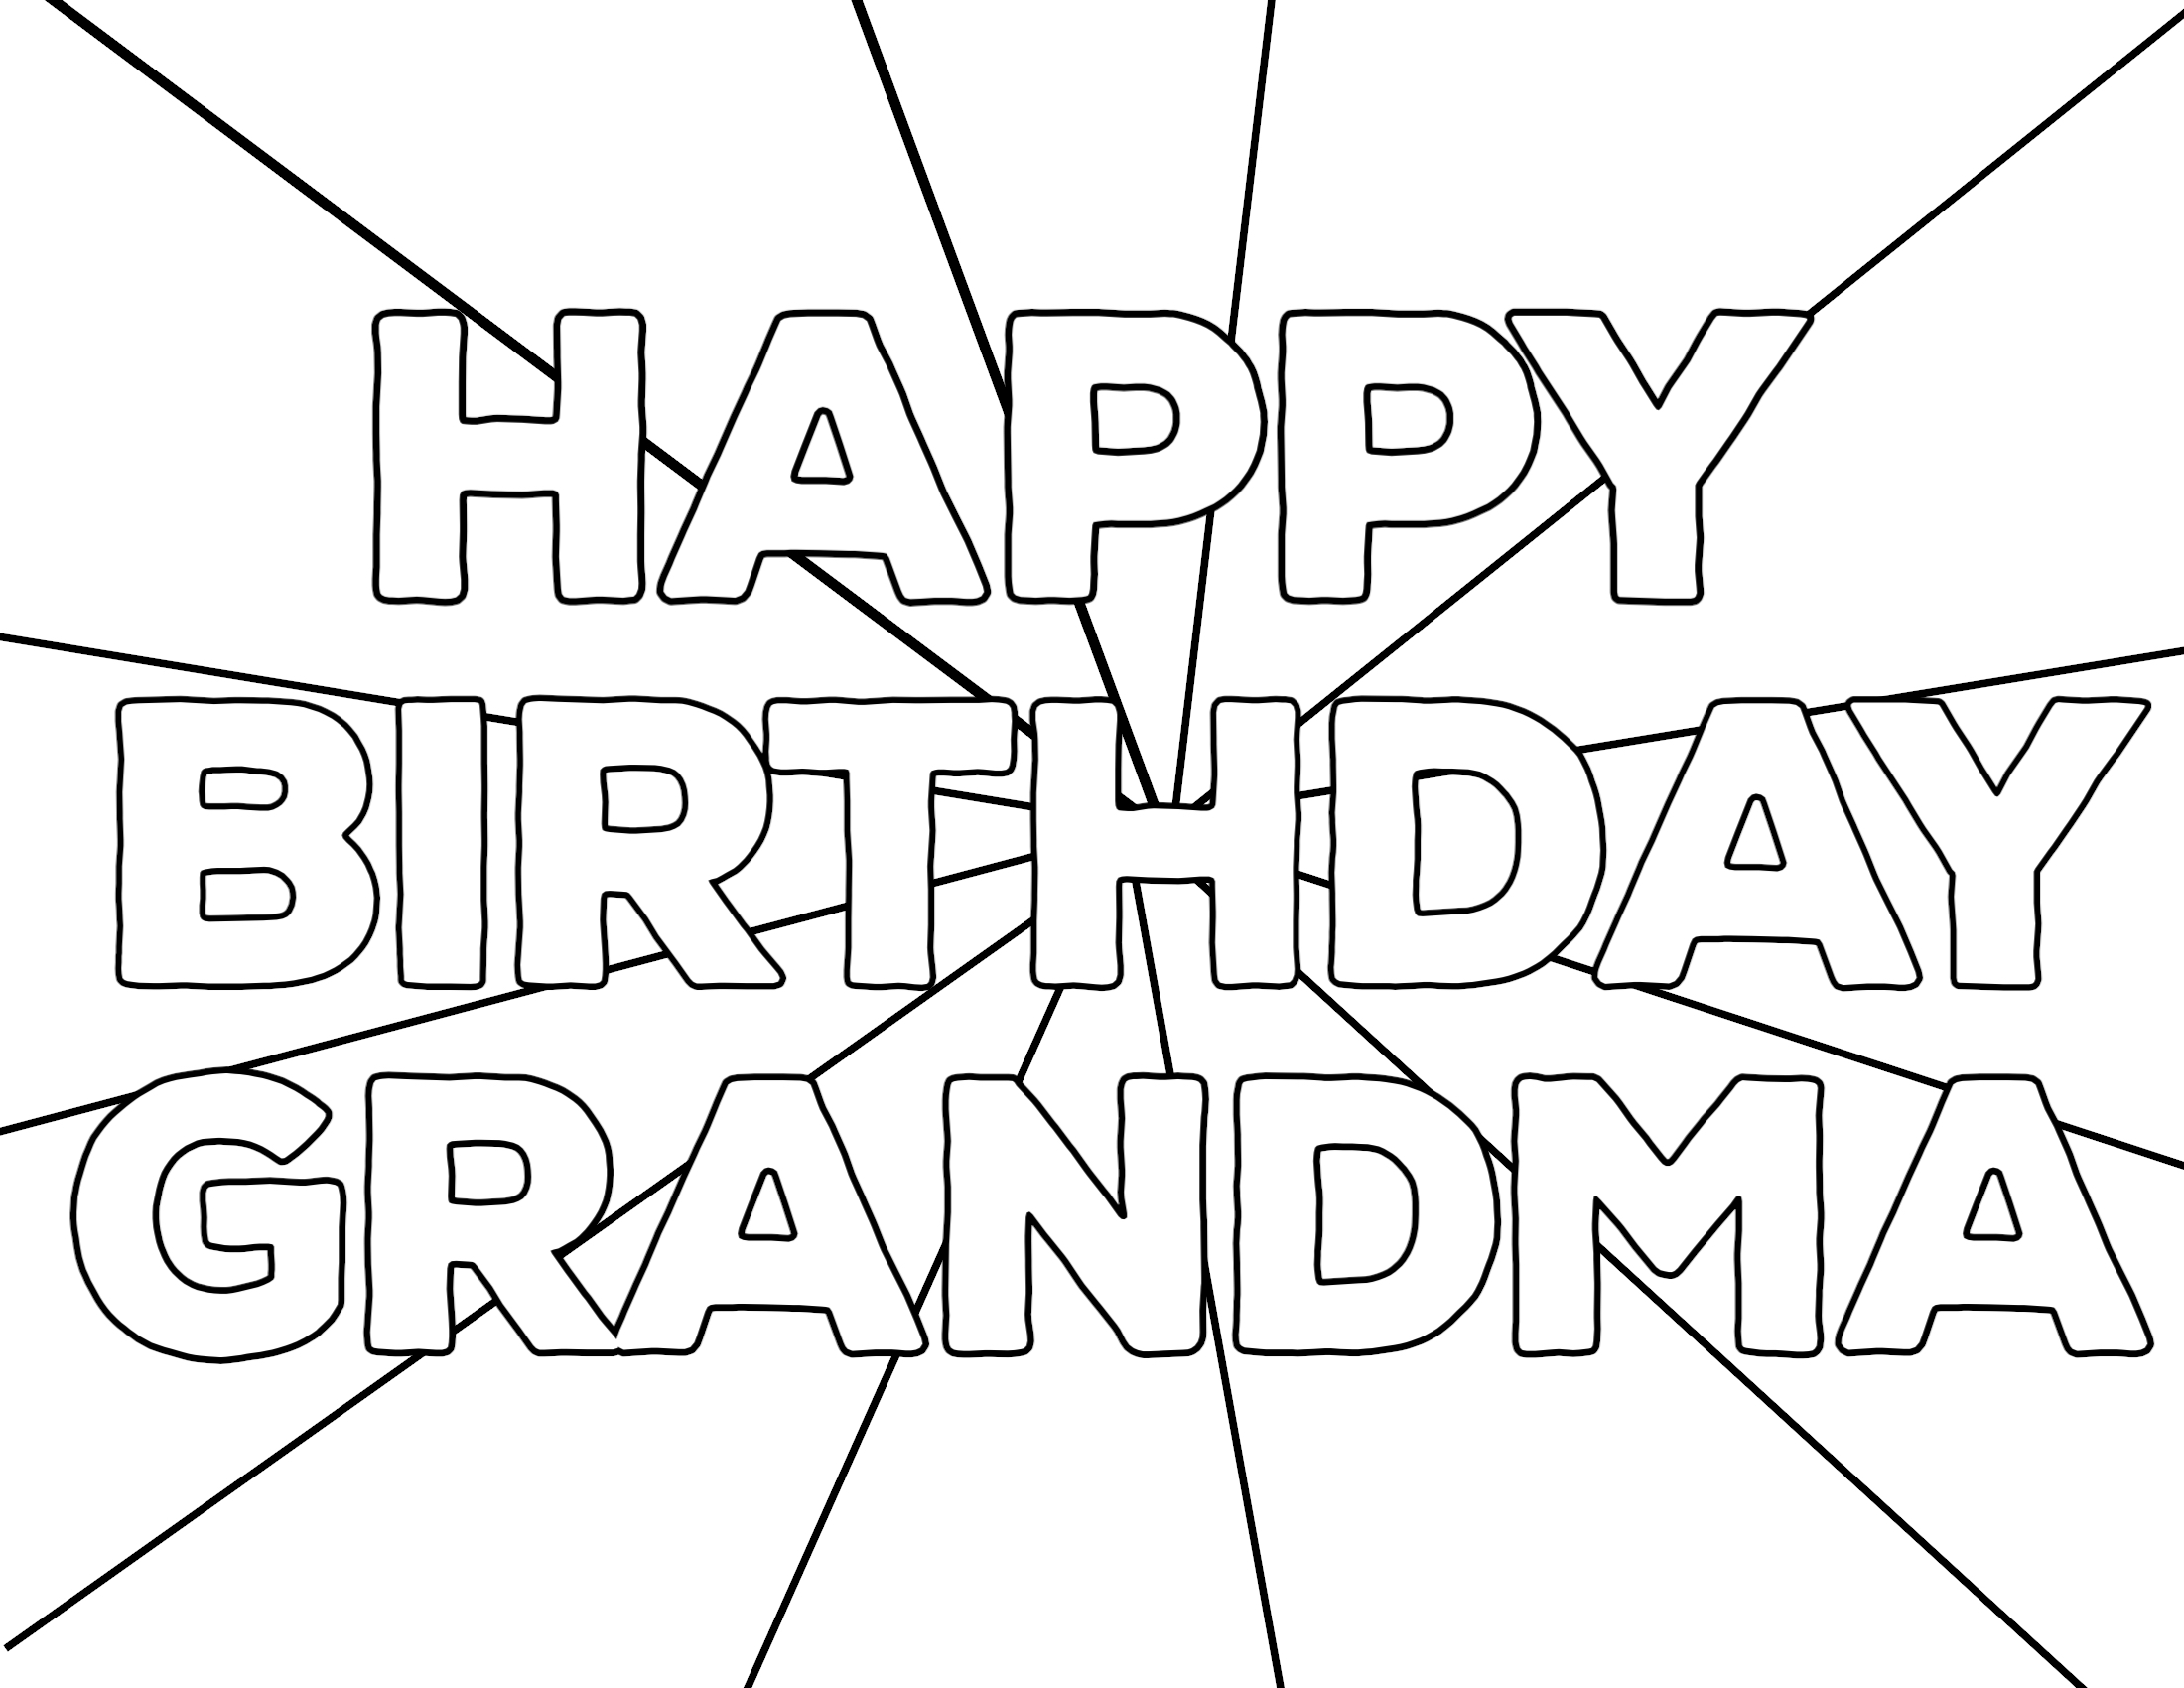 Coloring pages coloring pages printable coloring happy birthday cards grandma